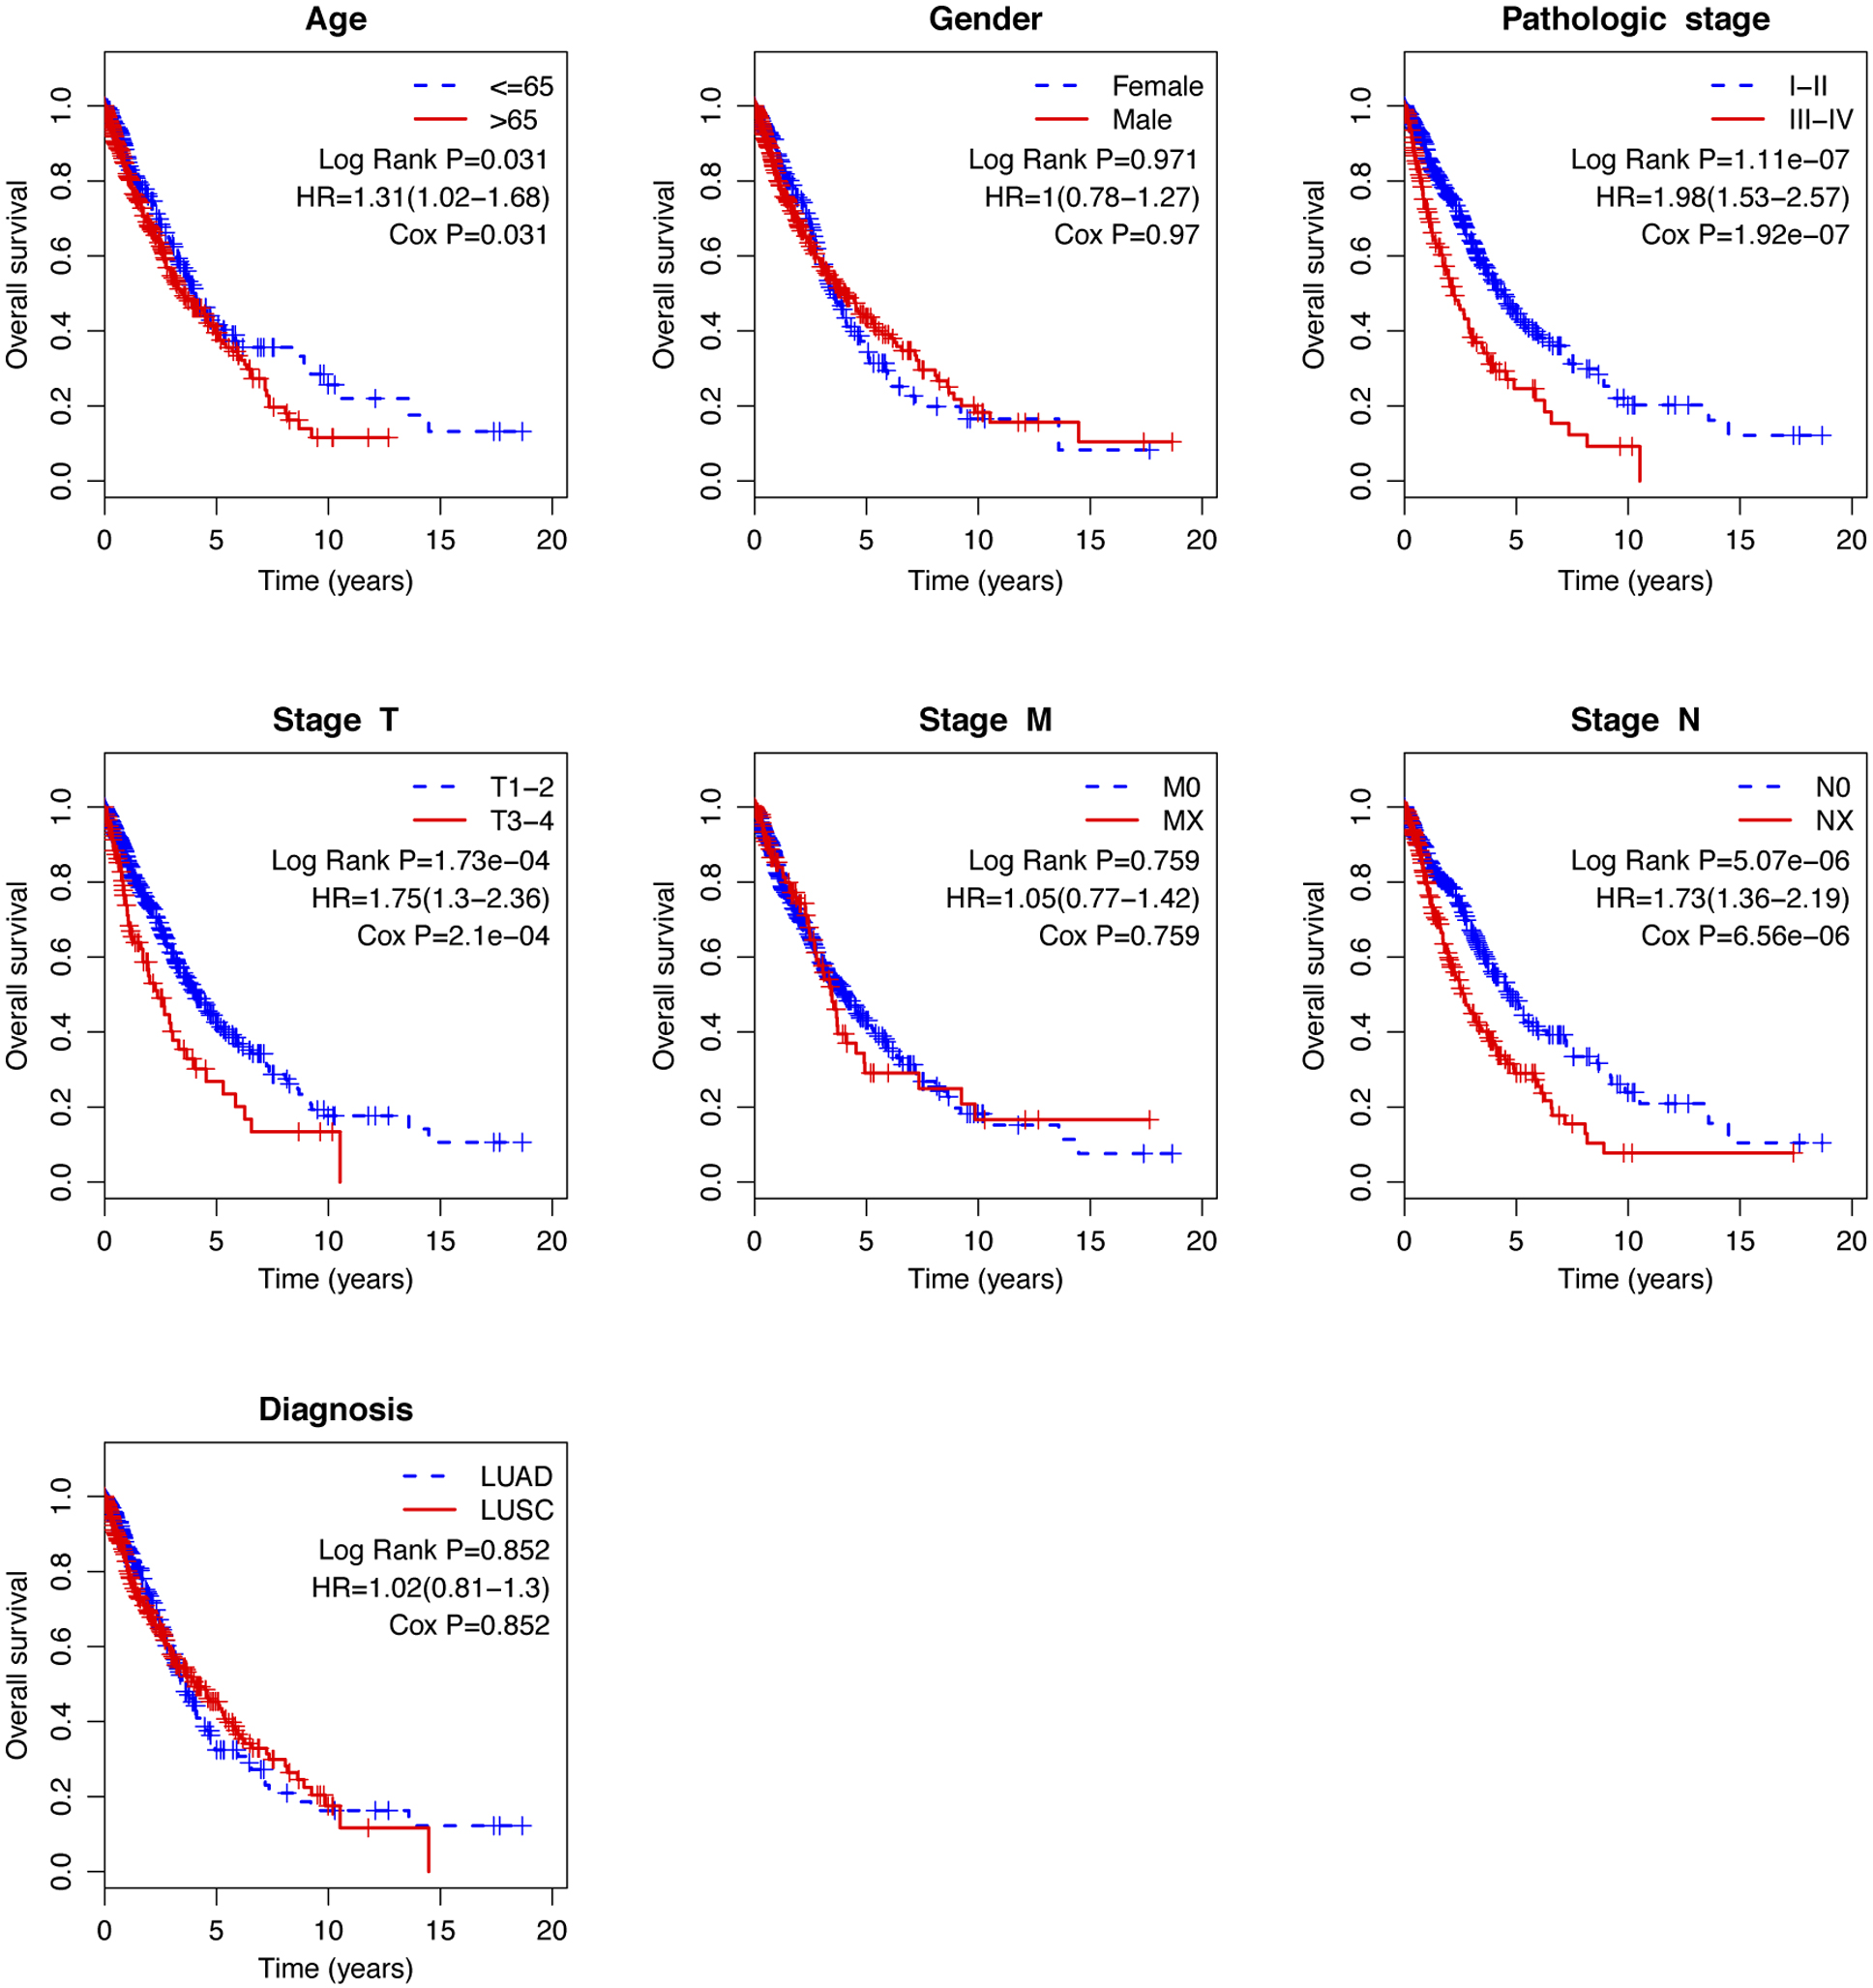 Kaplan-Meier curves analyzed the difference of overall survival when the patients were stratified by different clinical characteristics (age, gender, pathologic stage, stage T, stage M, stage N, and histological type).